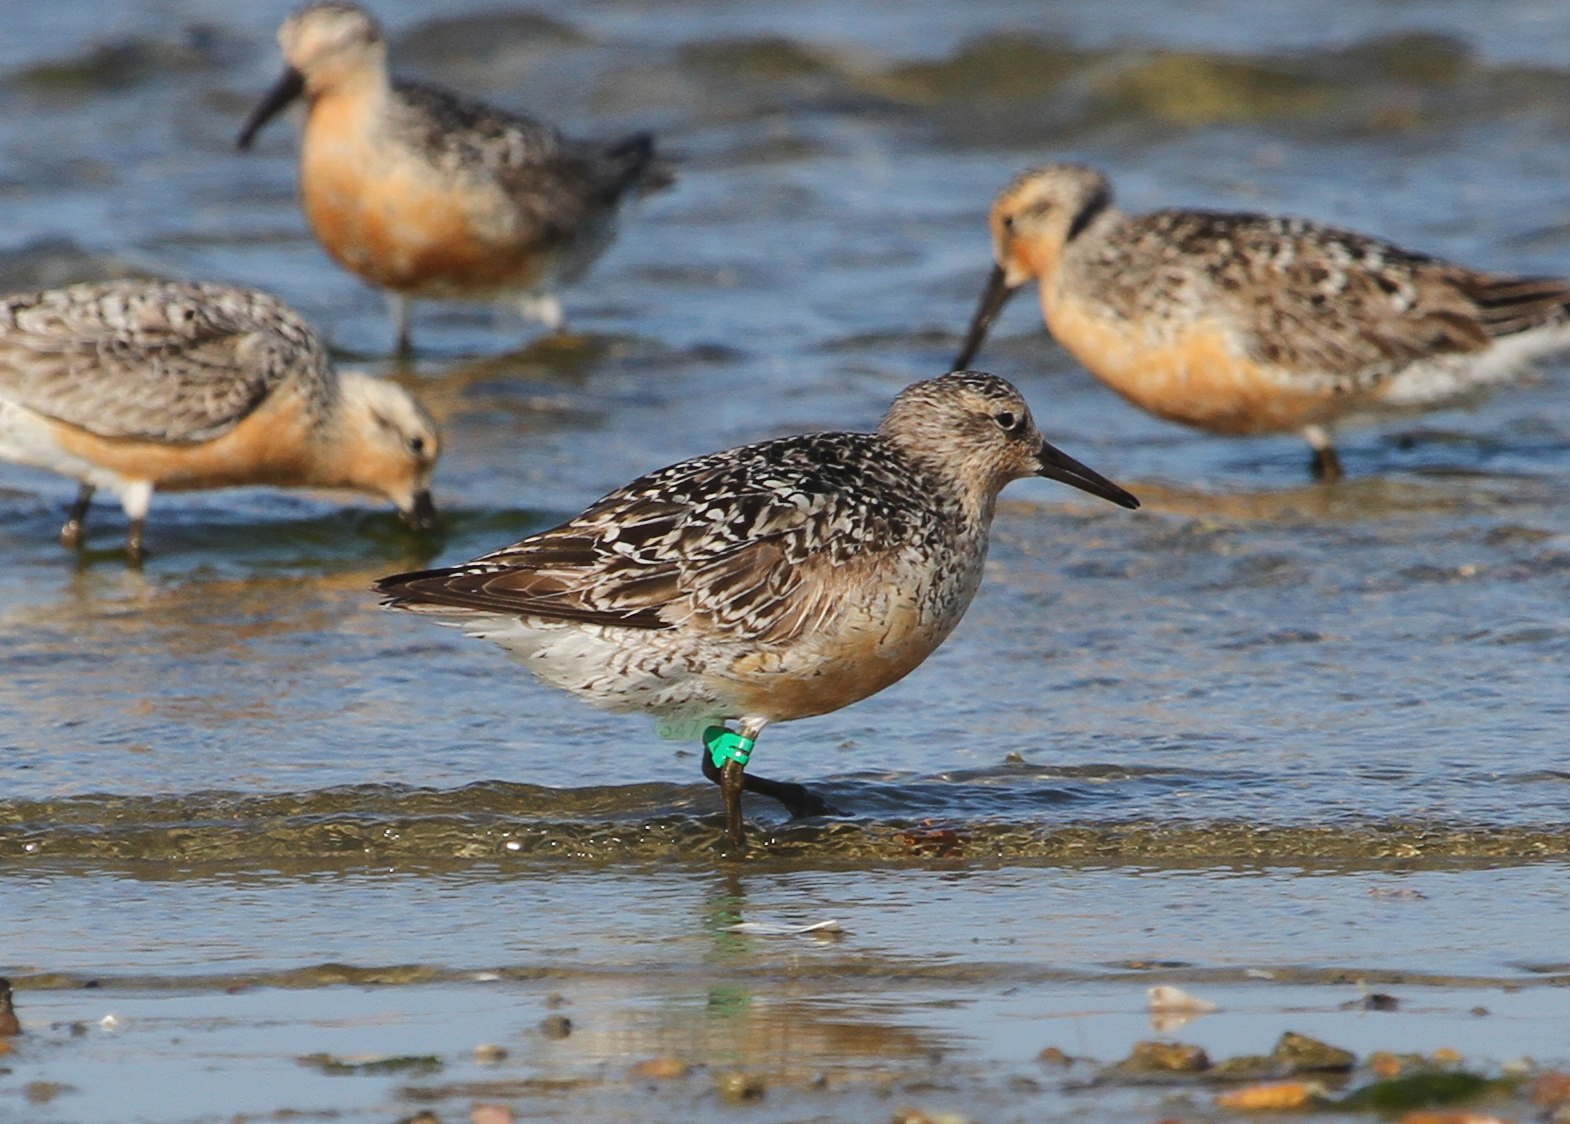 Red Knot with a geolocator that sends a signal periodically, allowing it to be tracked as it travels. (Photo by Mark Faherty).